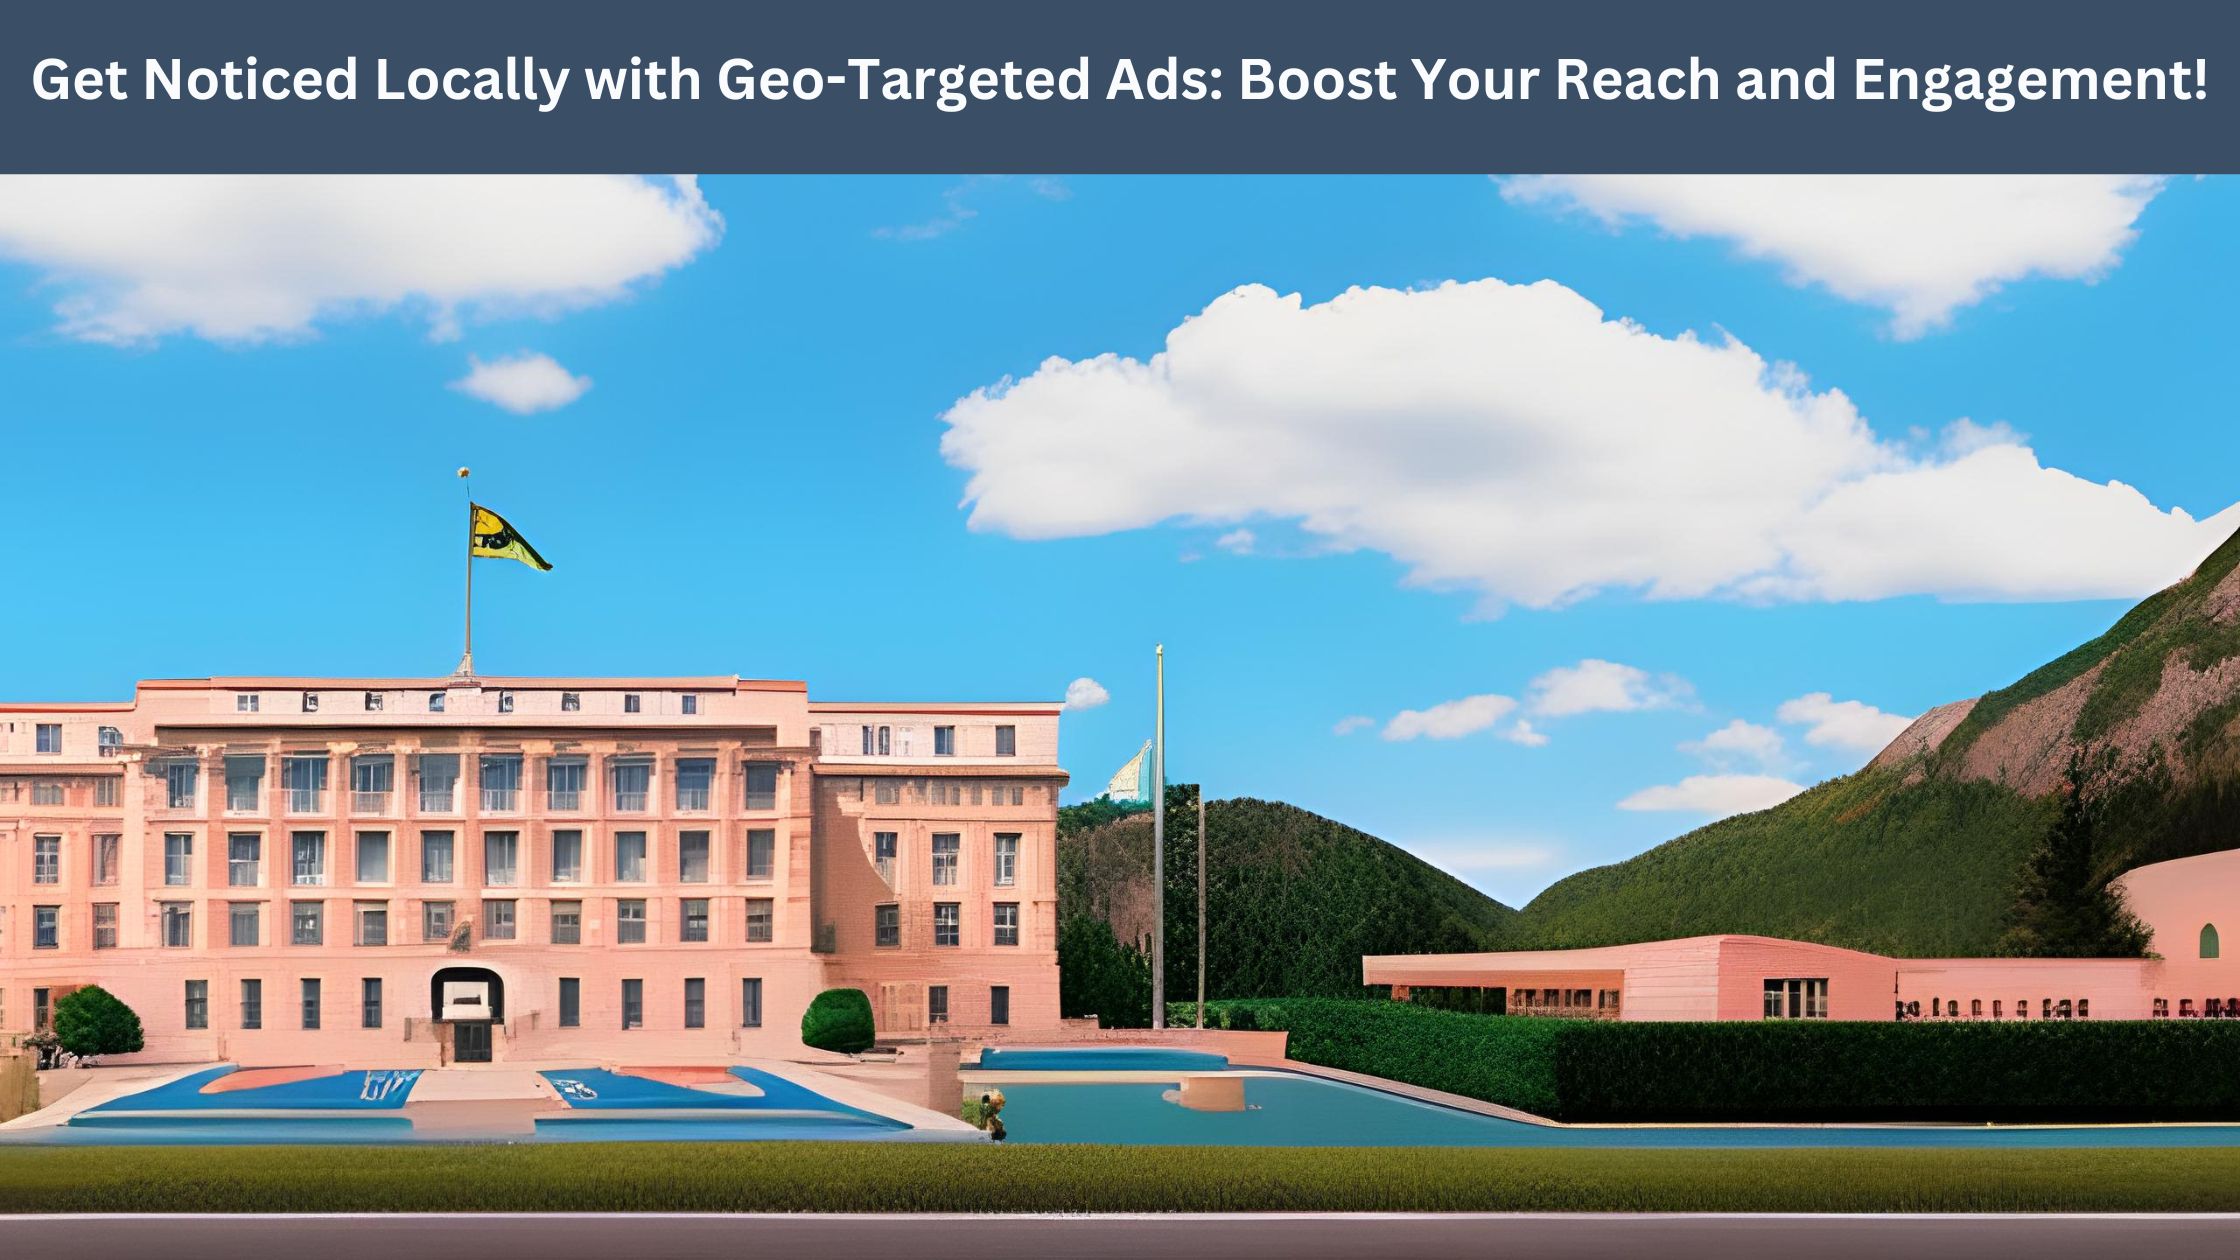 Get Noticed Locally with Geo-Targeted Ads: Increase Your Reach and Engagement!